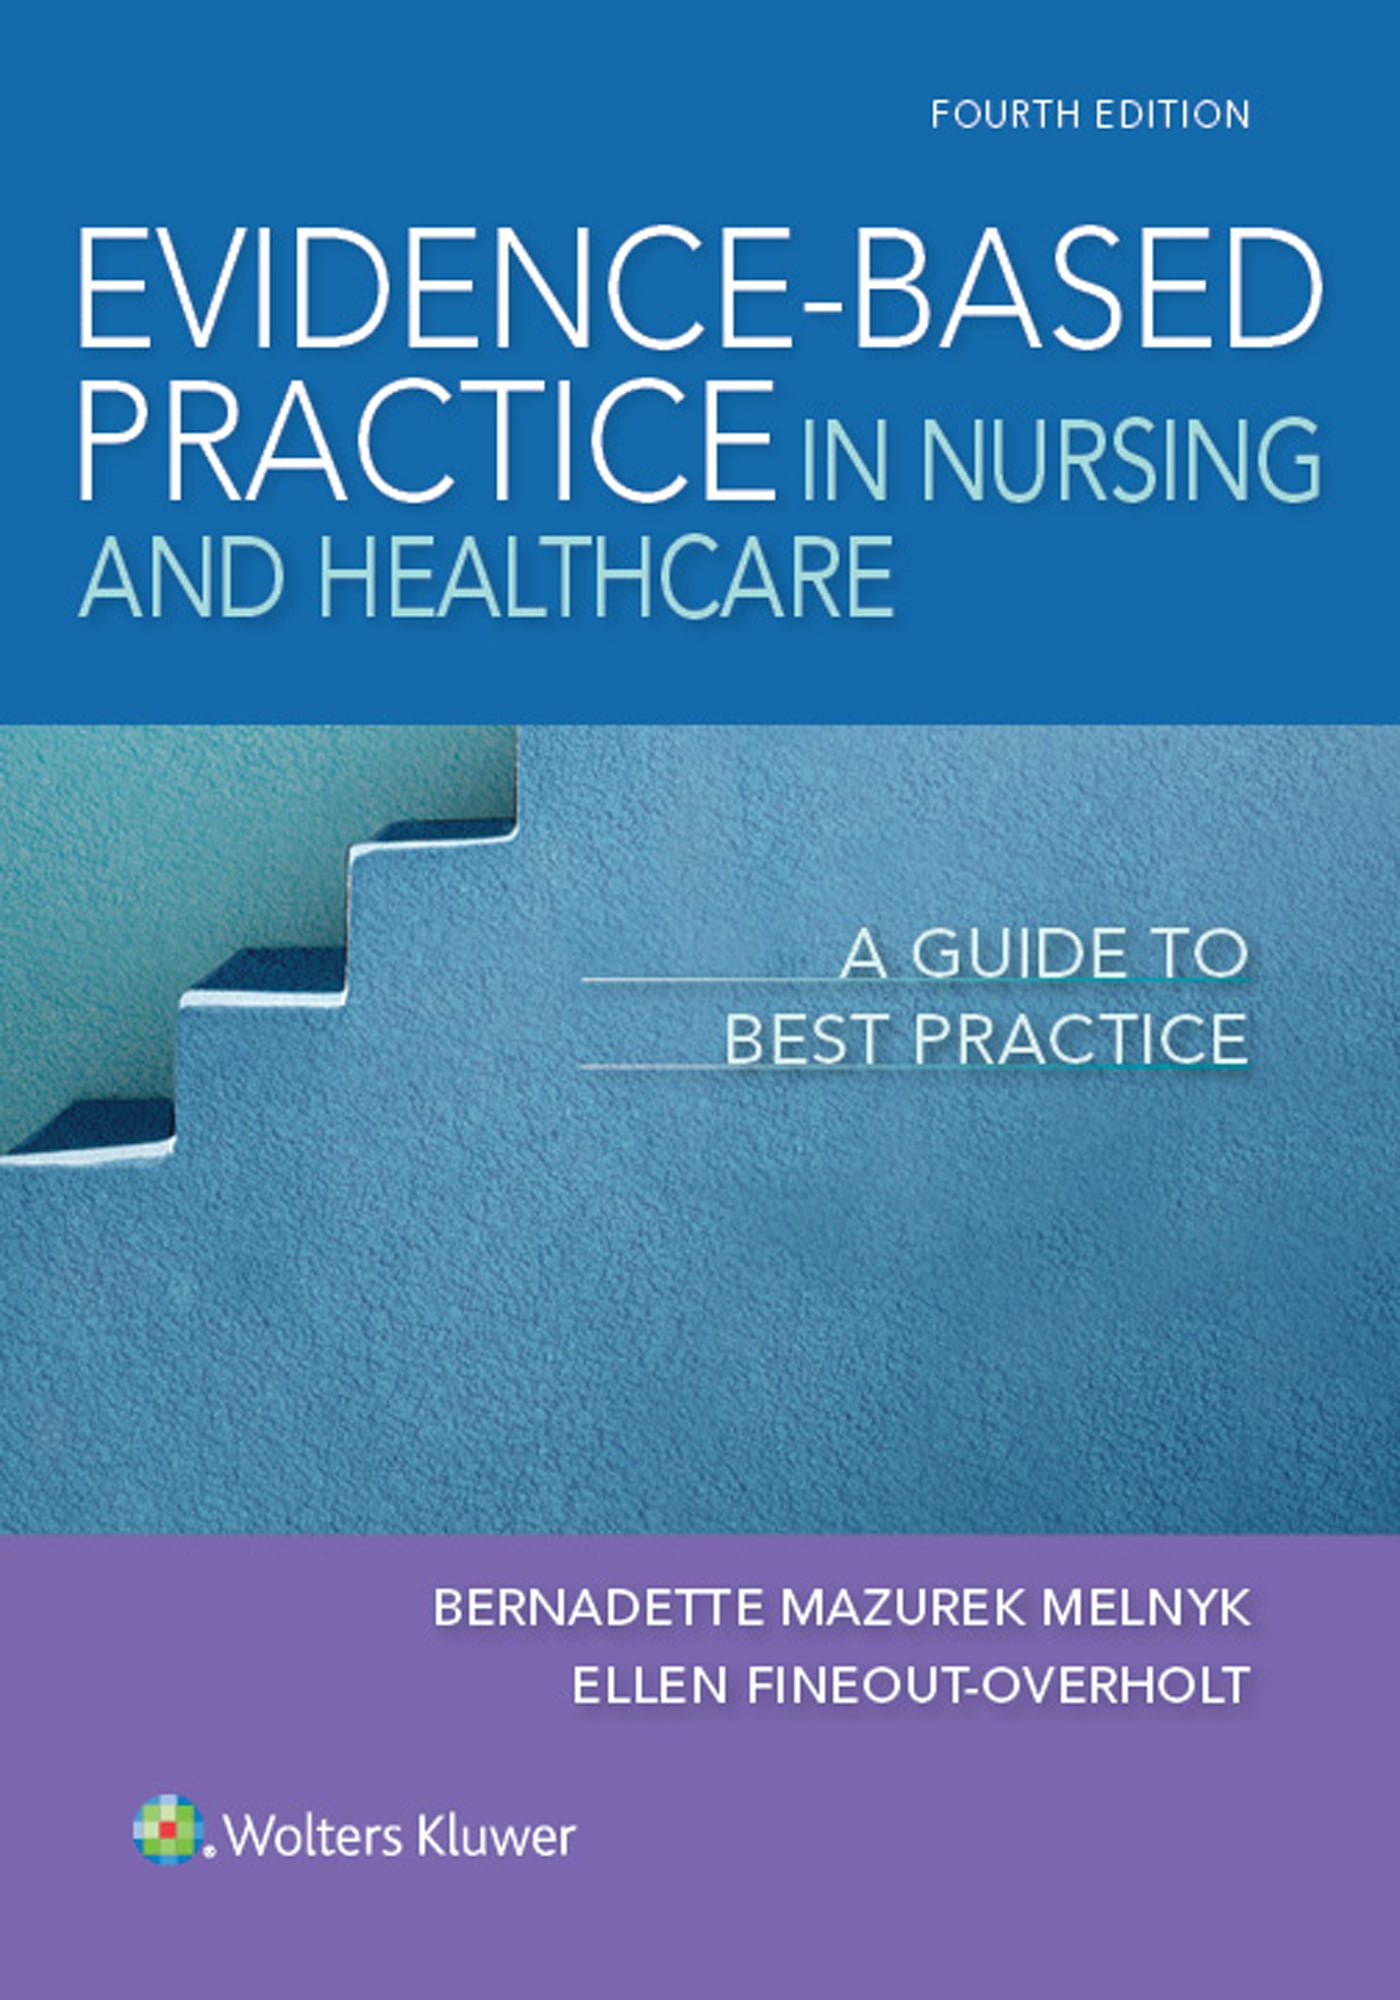 Healthcare　Evidence-Based　Best　Nursing　Practice　Practice　Guide　in　A　to